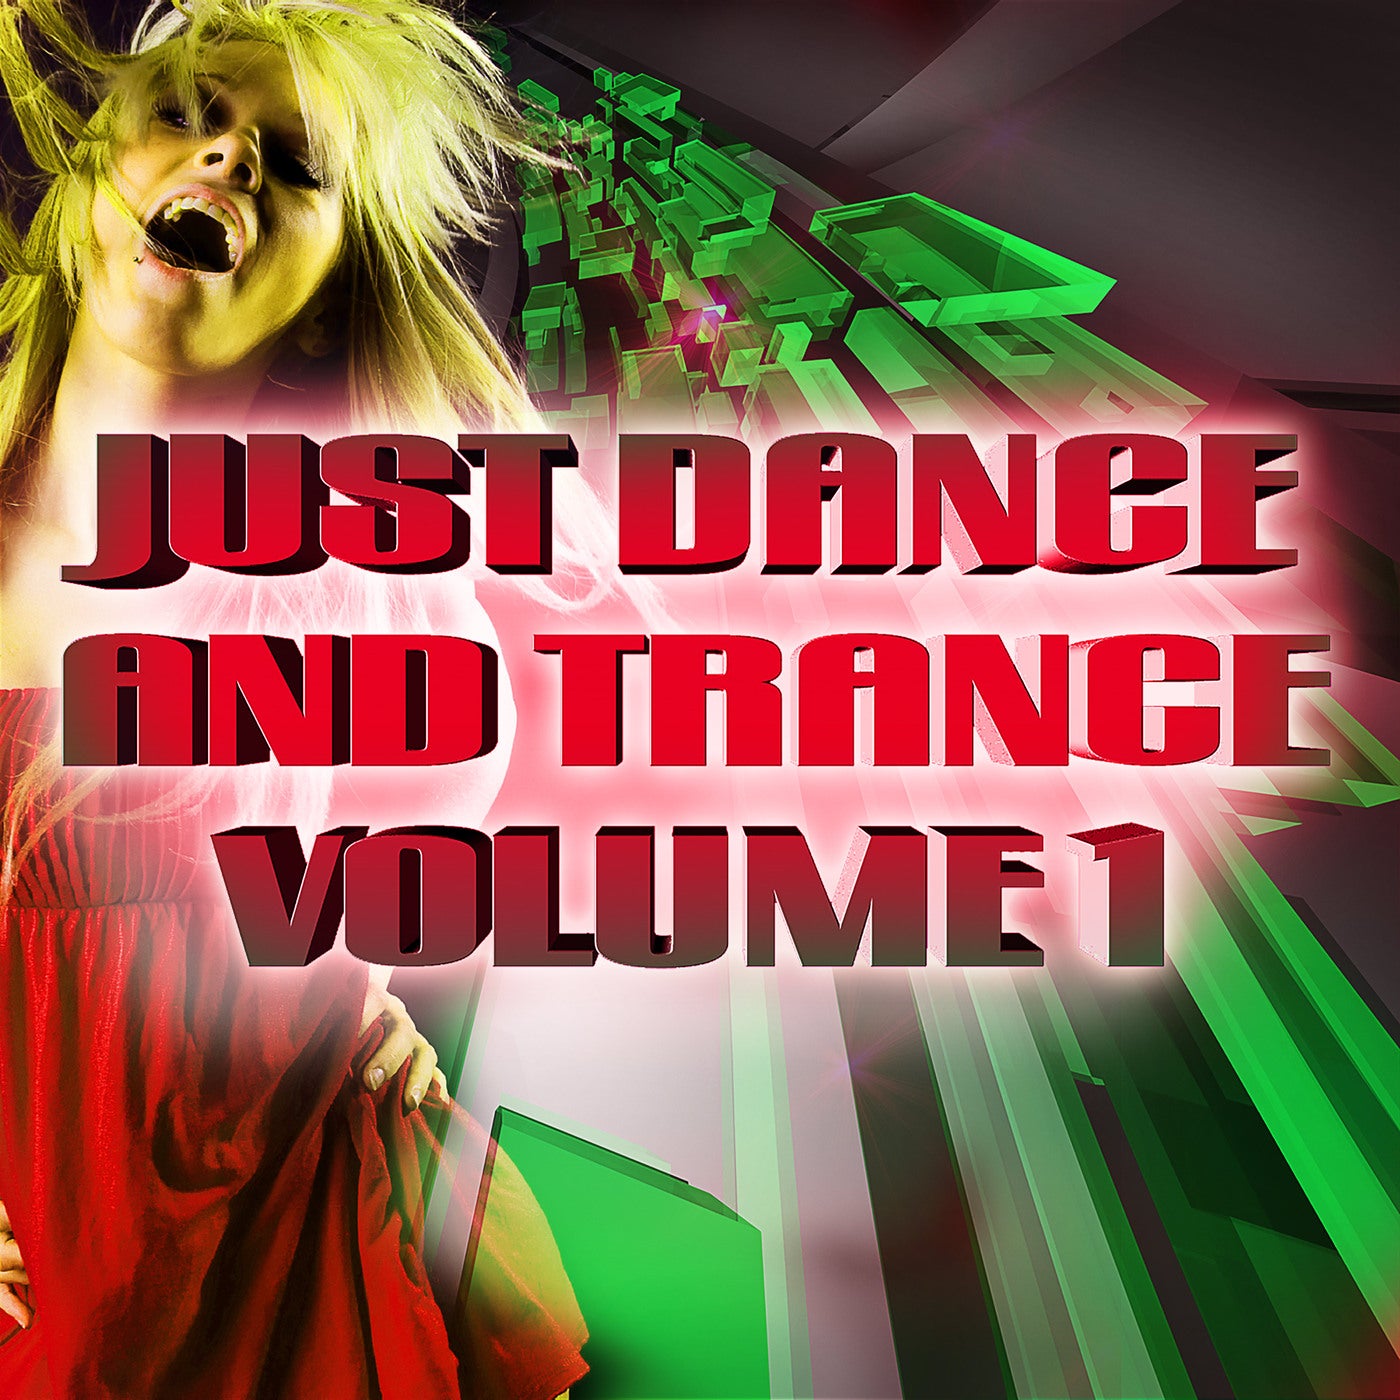 Just Dance and Trance, Vol. 1